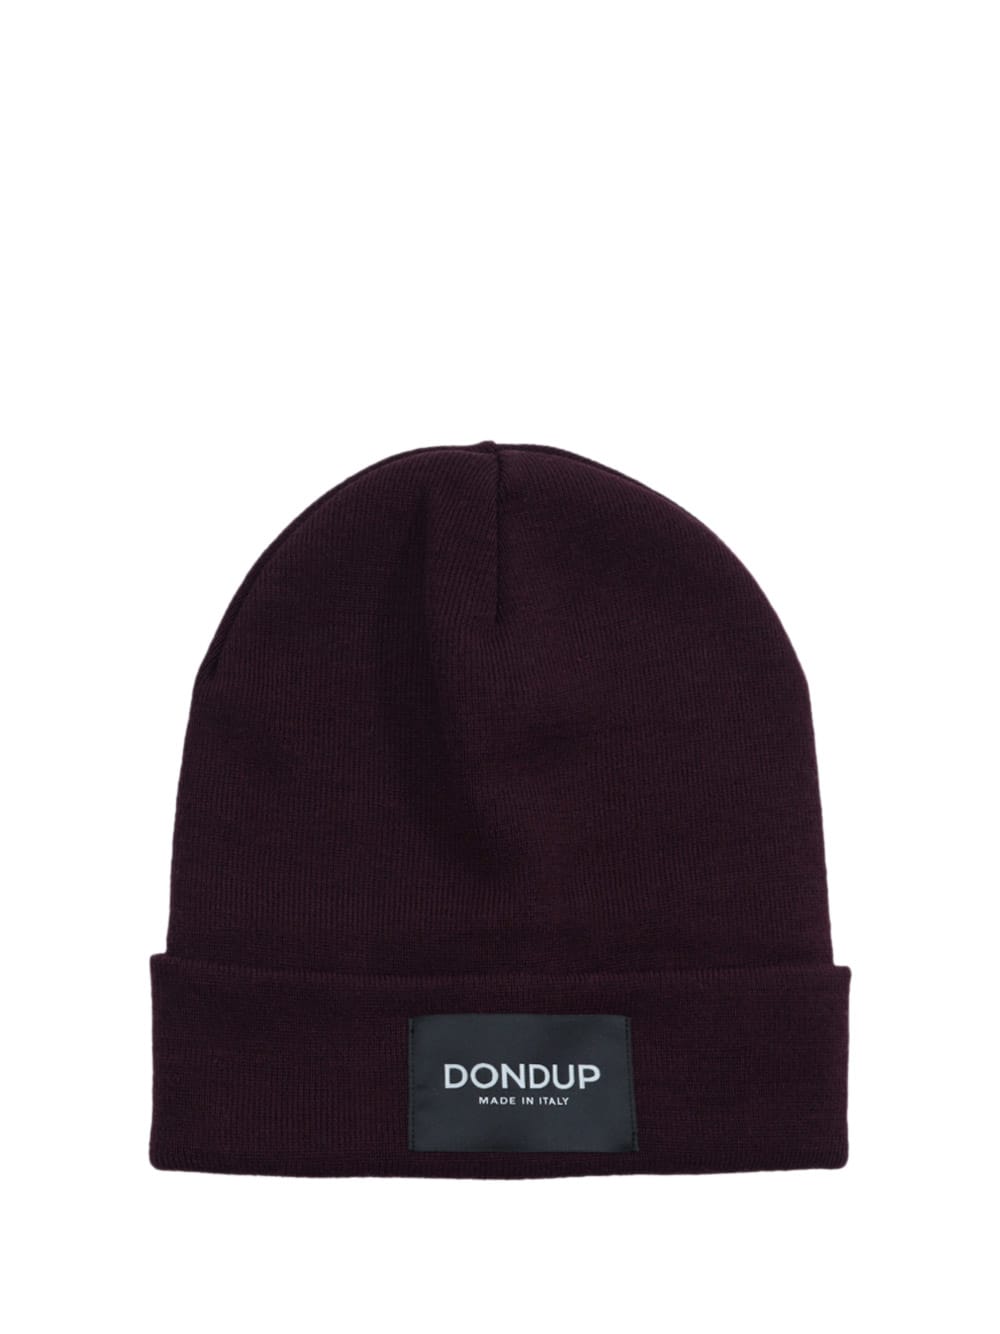 Dondup Cap With Logo In Bordeaux